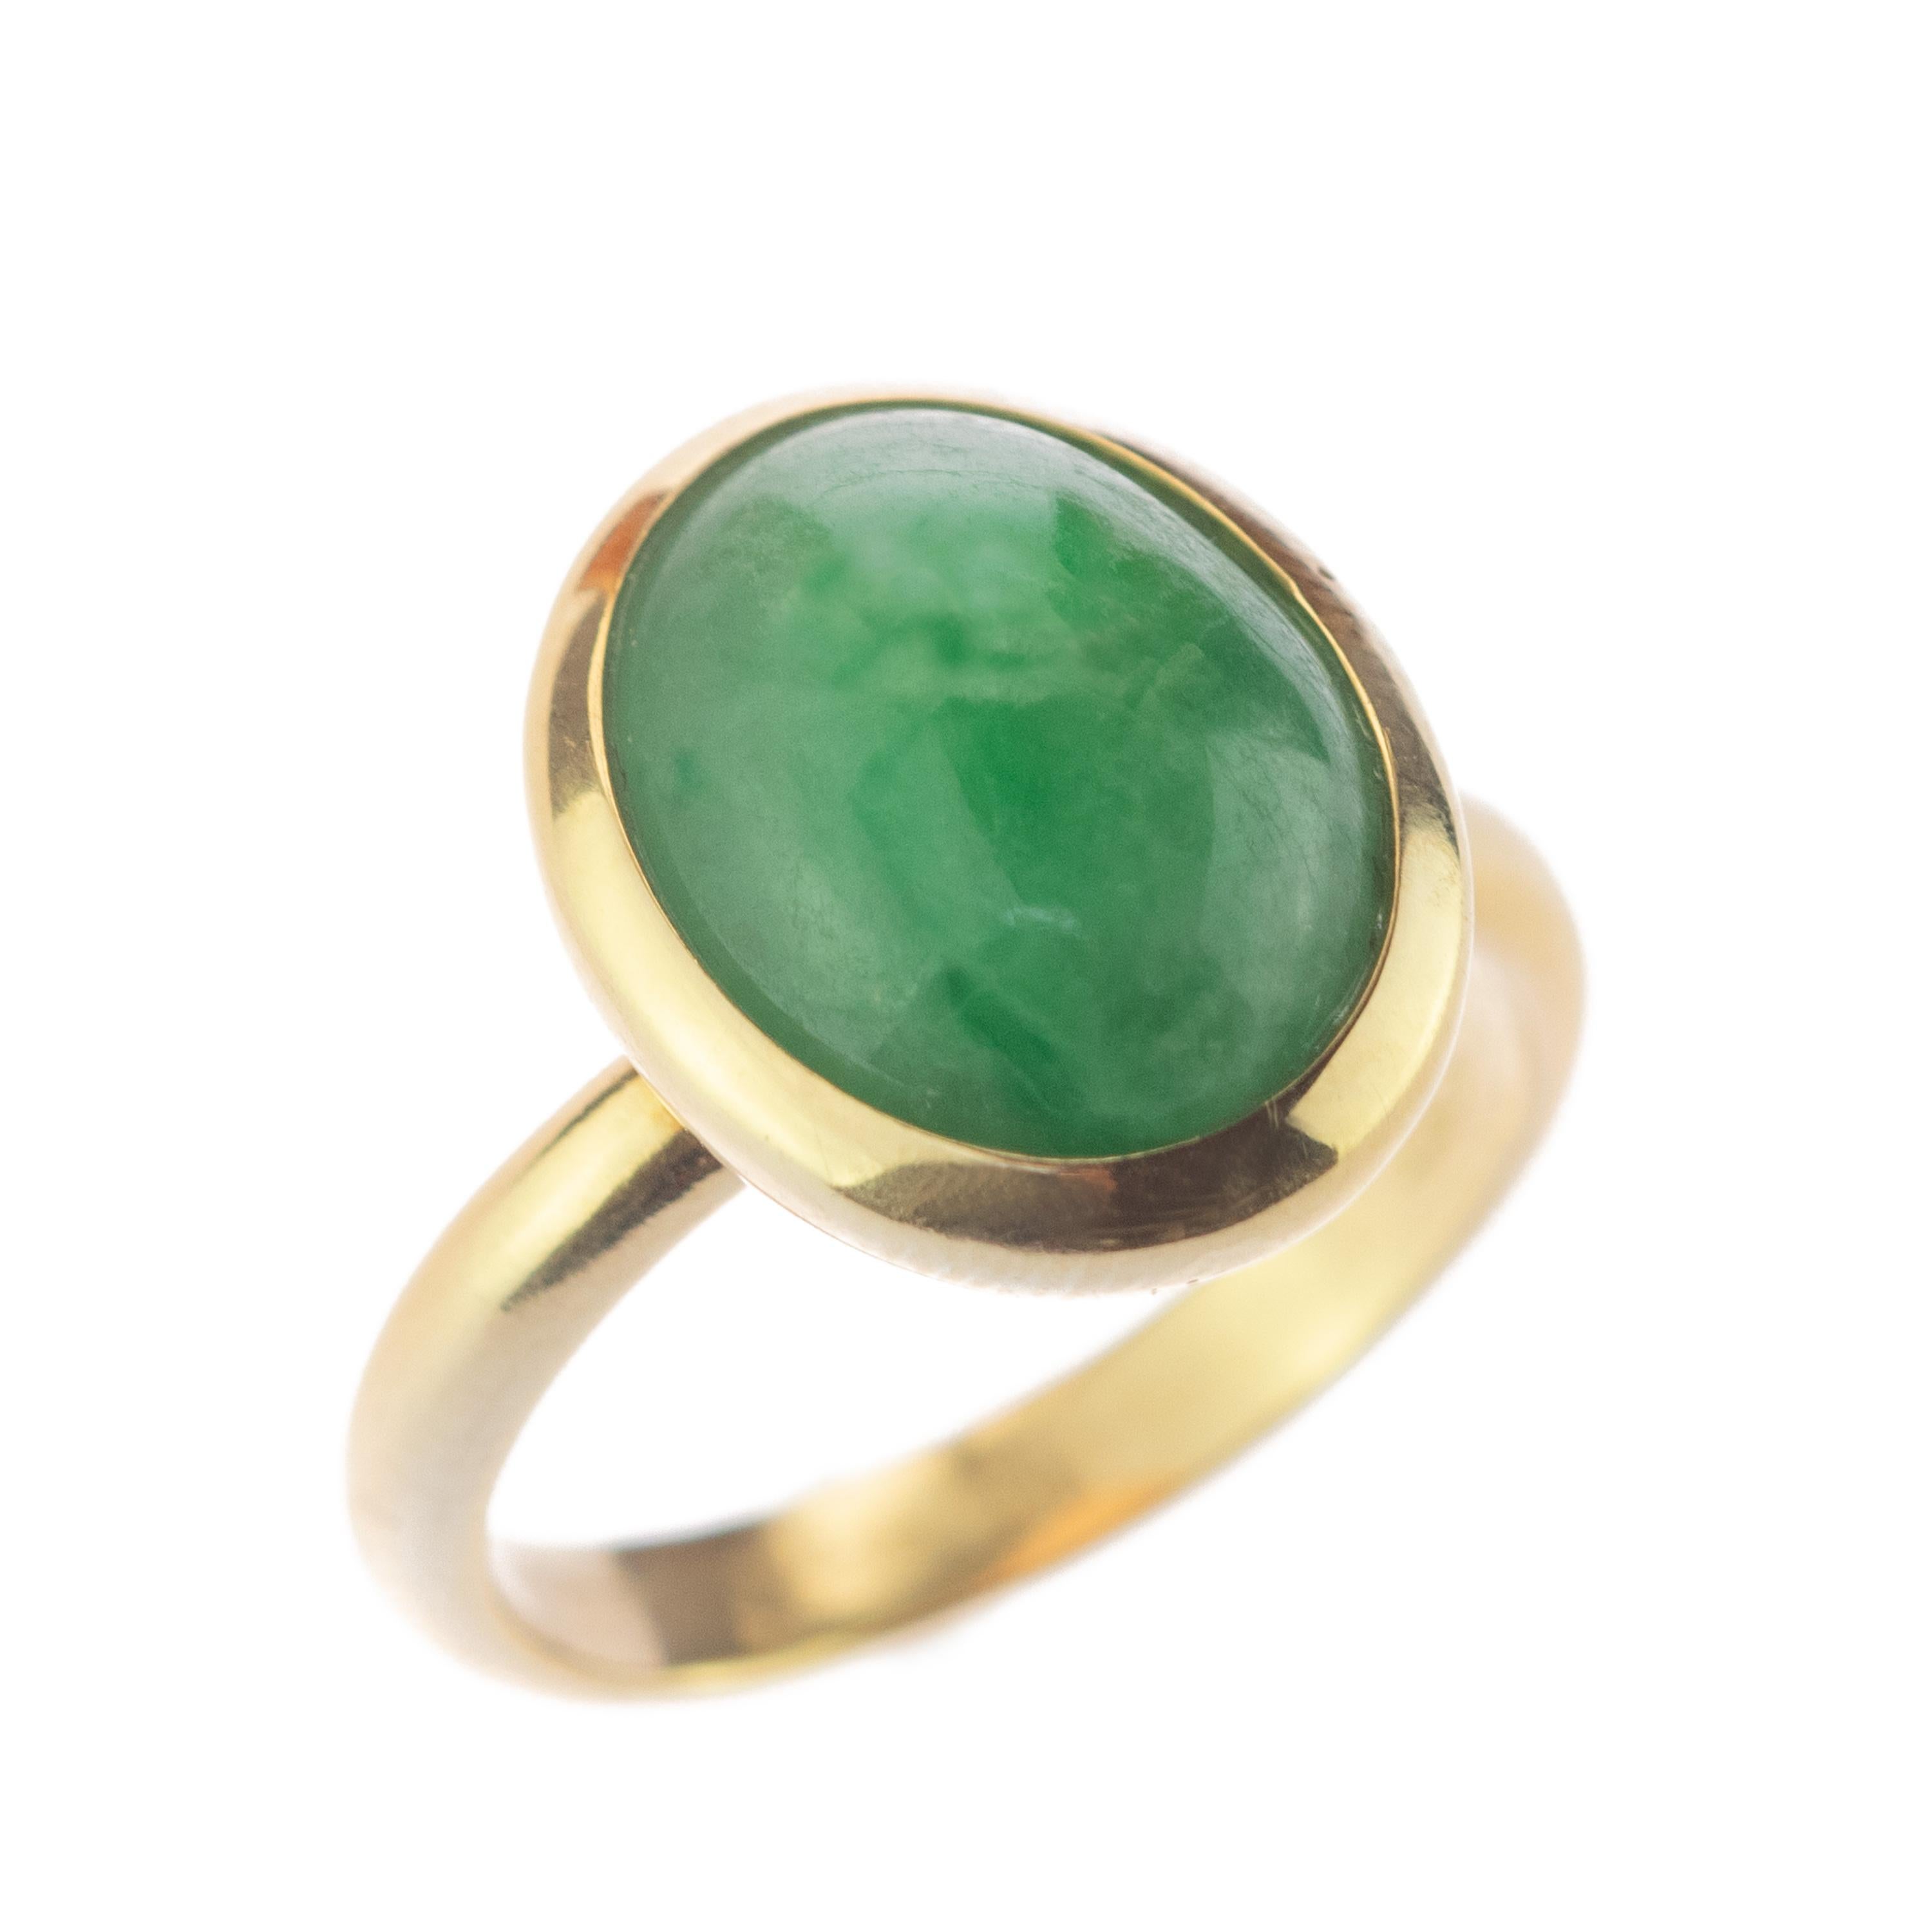 This minimalist design enhances a matte precious natural central 10.5 carats Jade cabochon situated north to south. The 18 karat yellow gold ring highlights the green color and oval shape, surrounding into a glamorous, boho and eccentric touch. Boho